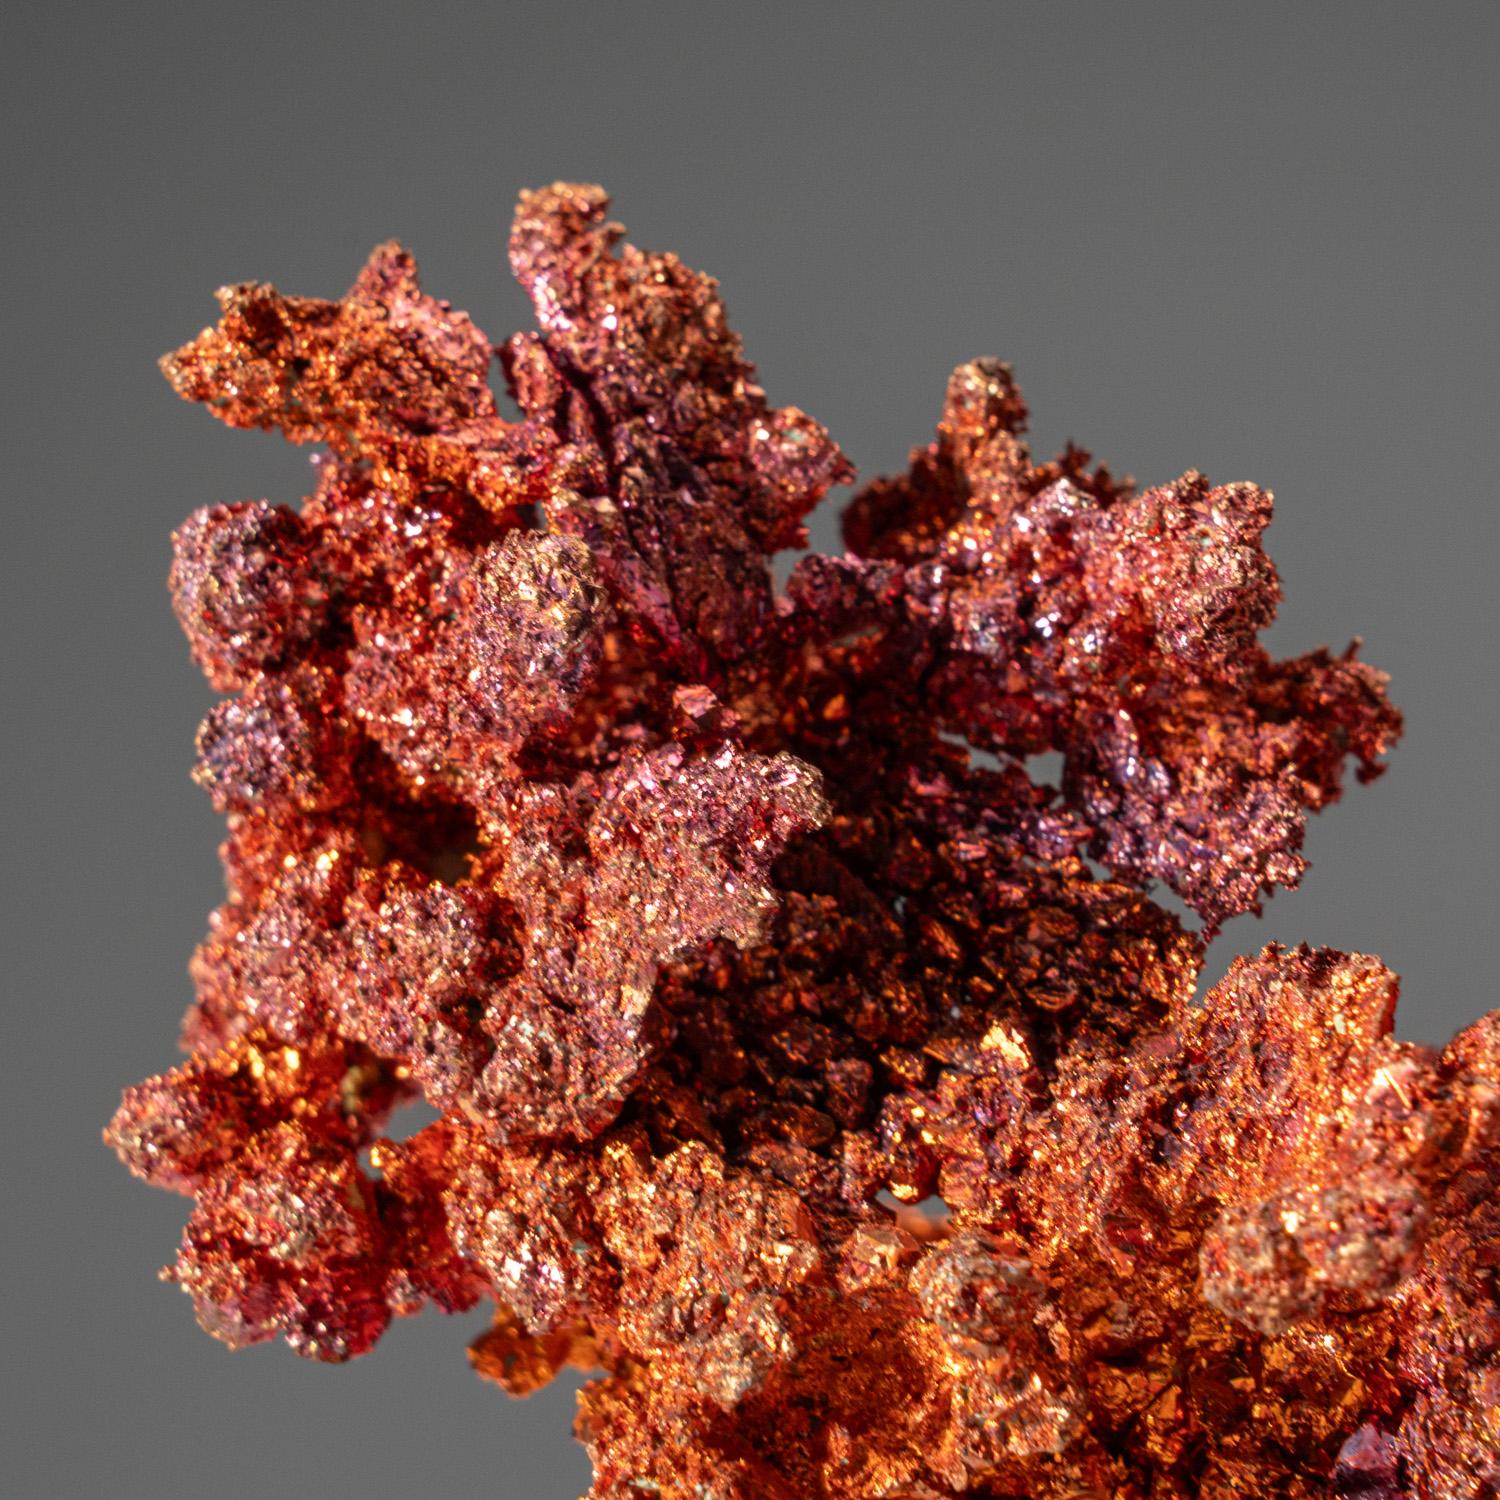 Sculptural formation of sharp, distinct copper crystals from Jiujiang Co., Jiangxi Province, China. The copper looks beautiful under magnification. A lovely display piece for natural element specimen collectors.

 

Weight: 1.15 lbs, Approx.